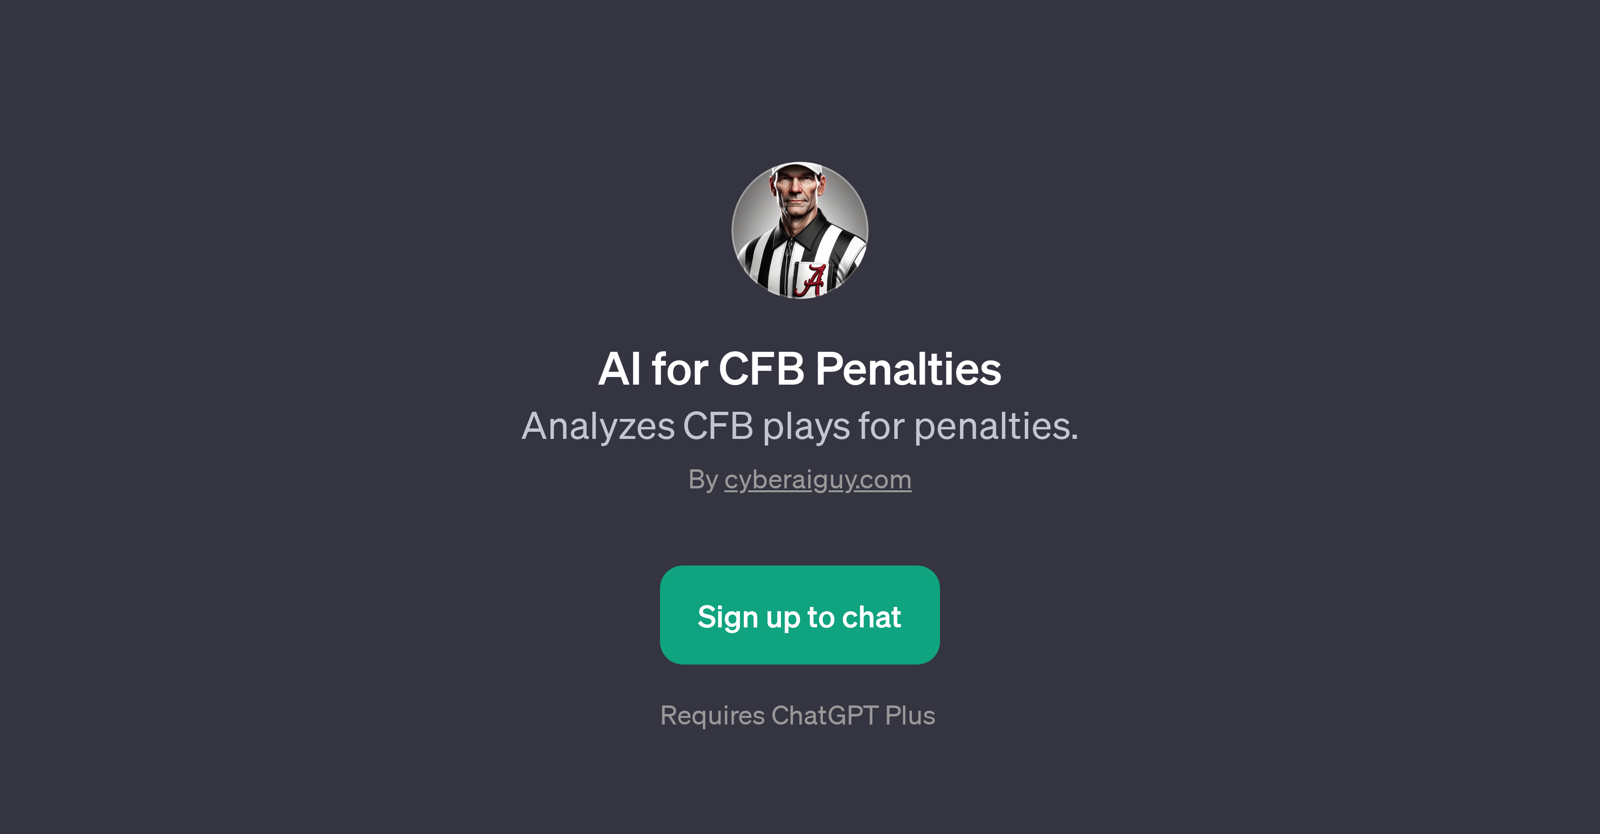 AI for CFB Penalties website